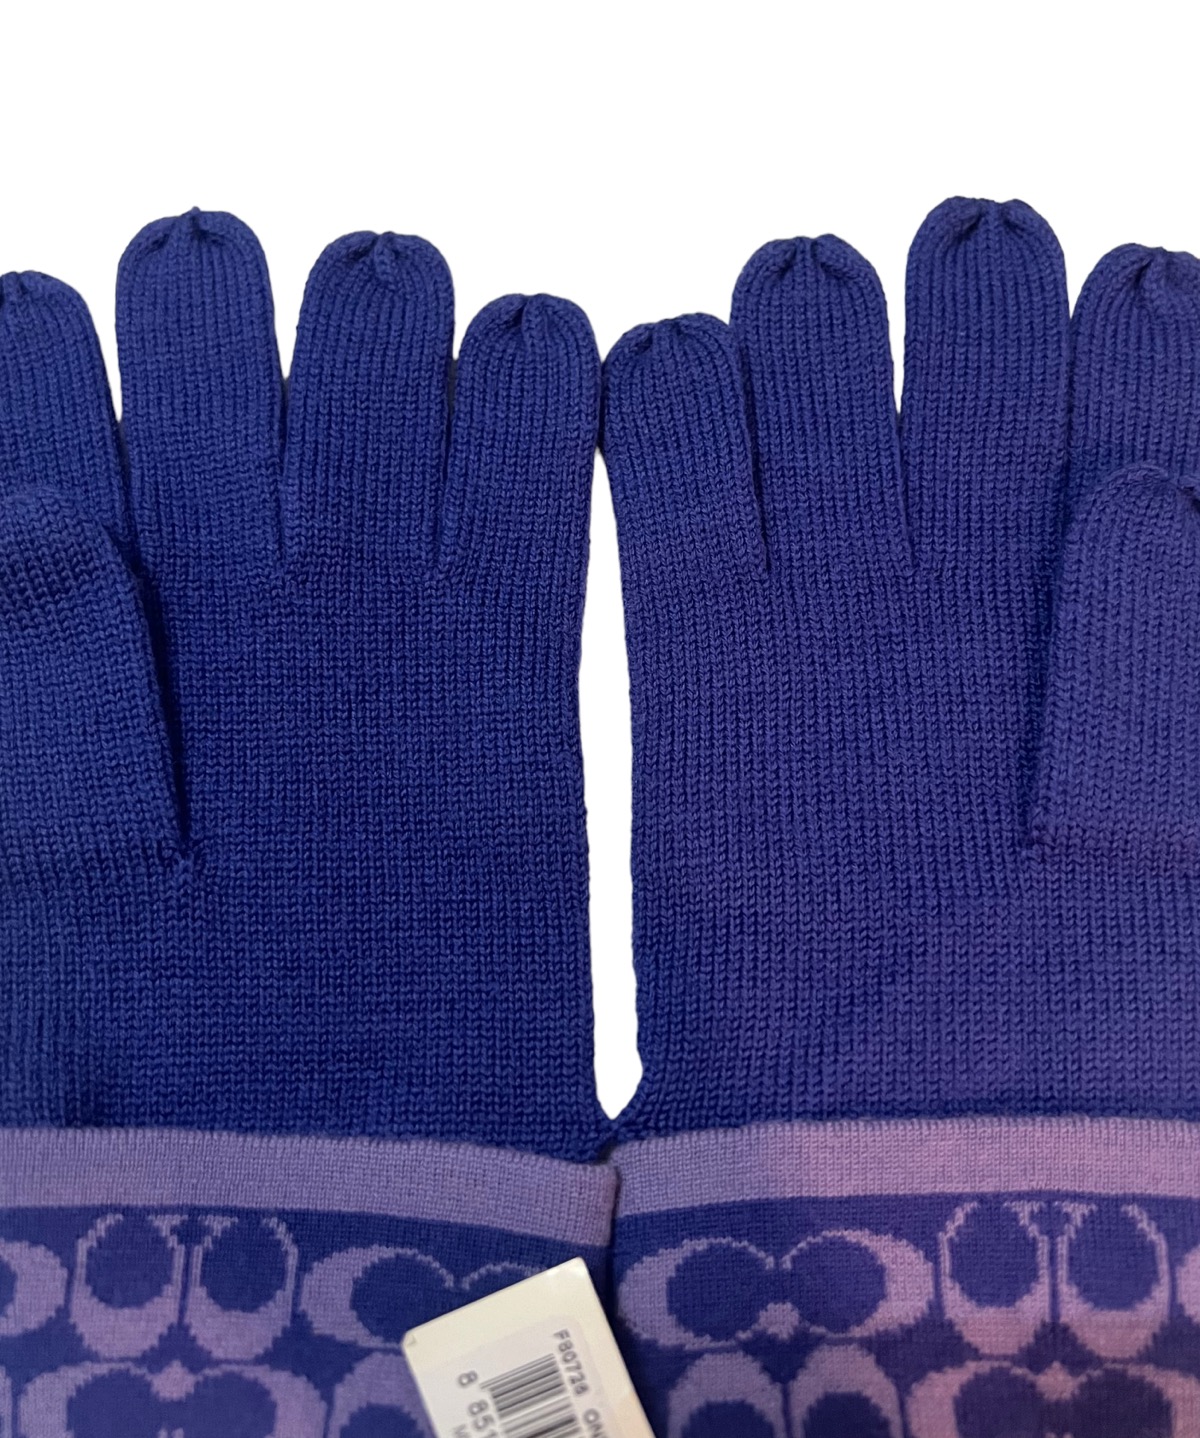 Coach - COACH ( NEW OLD STOCK ) (NOS) SIGNATURE KNIT TECH GLOVES - 6